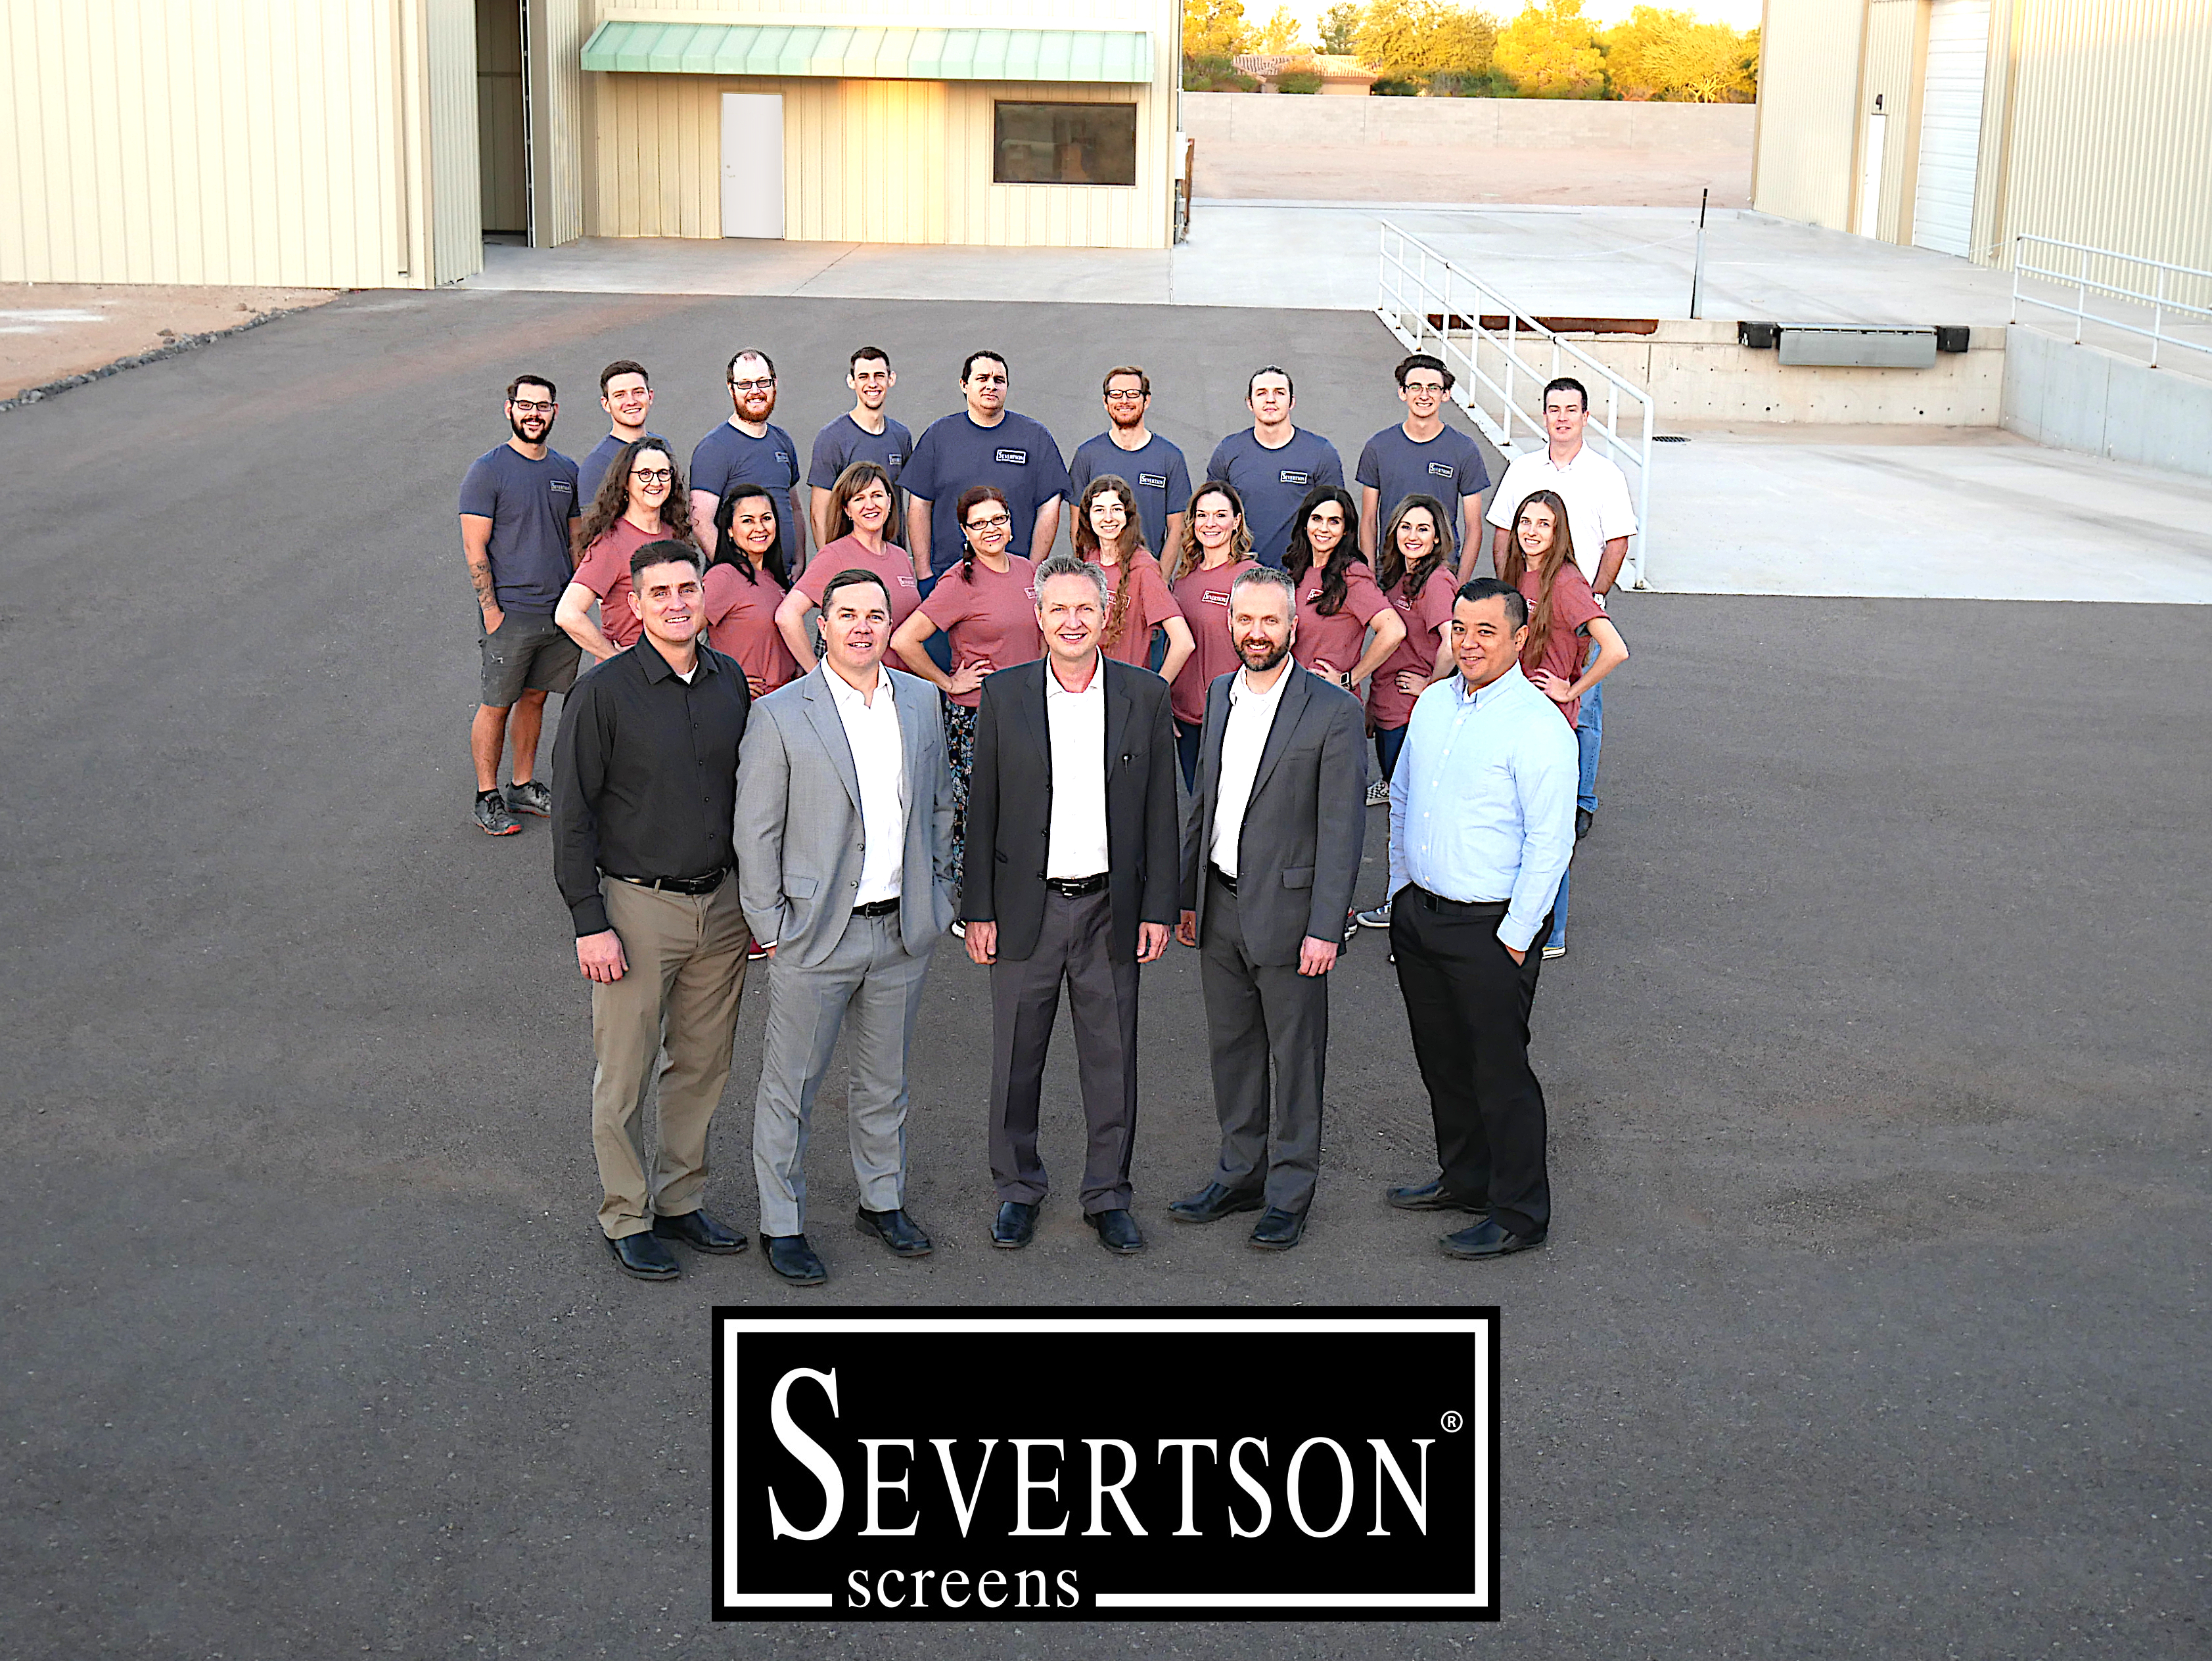 Severtson employees pose for a group photo at the new San Tan Valley facility